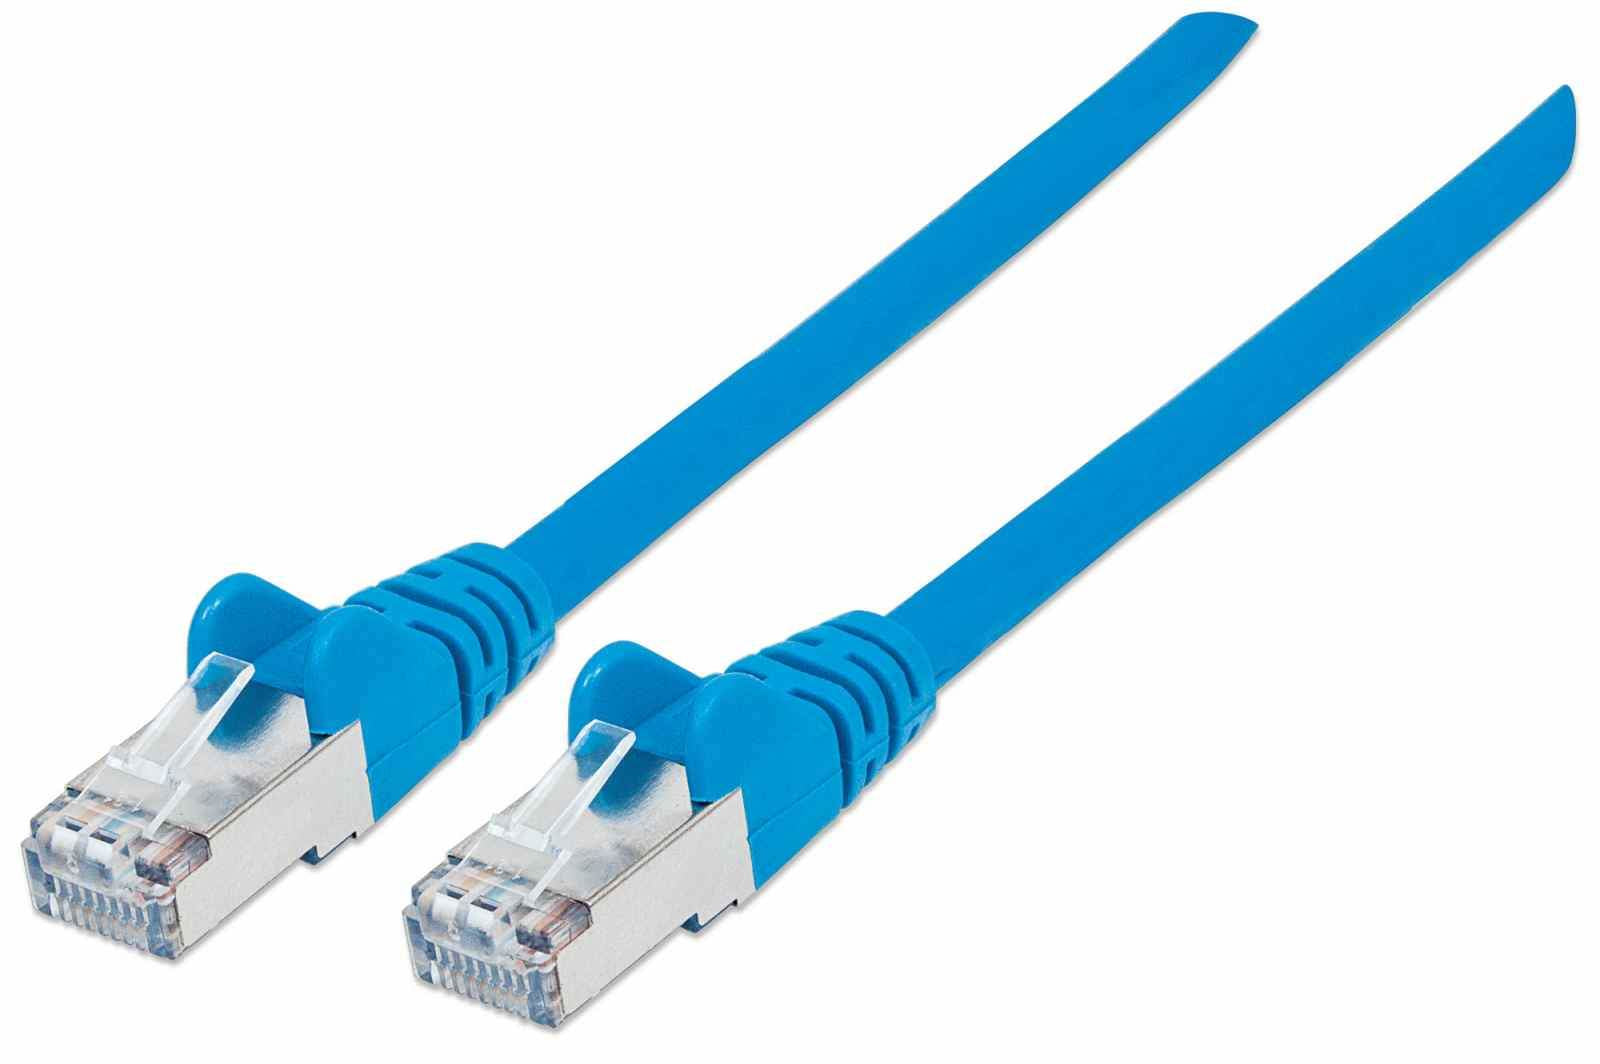 Intellinet Network Patch Cable, Cat7 Cable/Cat6A Plugs, 0.5m, Blue, Copper, S/FTP, LSOH / LSZH, PVC, RJ45, Gold Plated Contacts, Snagless, Booted, Lifetime Warranty, Polybag